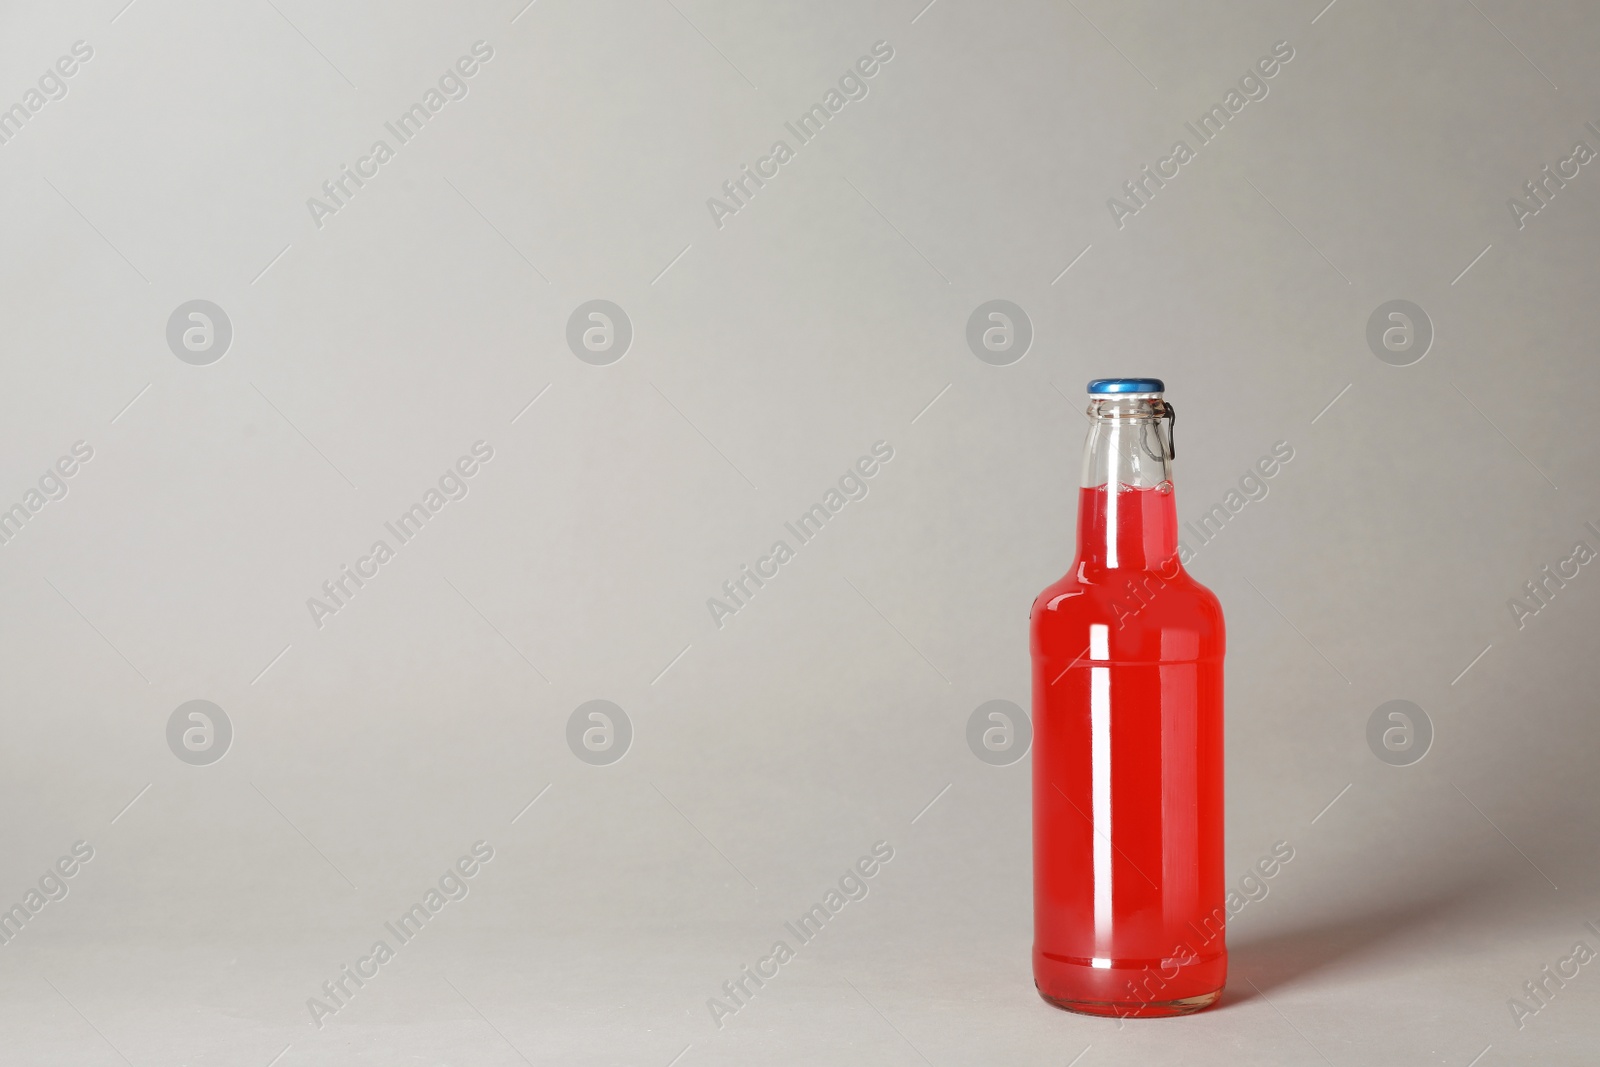 Photo of Bottle of alcoholic drink on grey background. Space for text